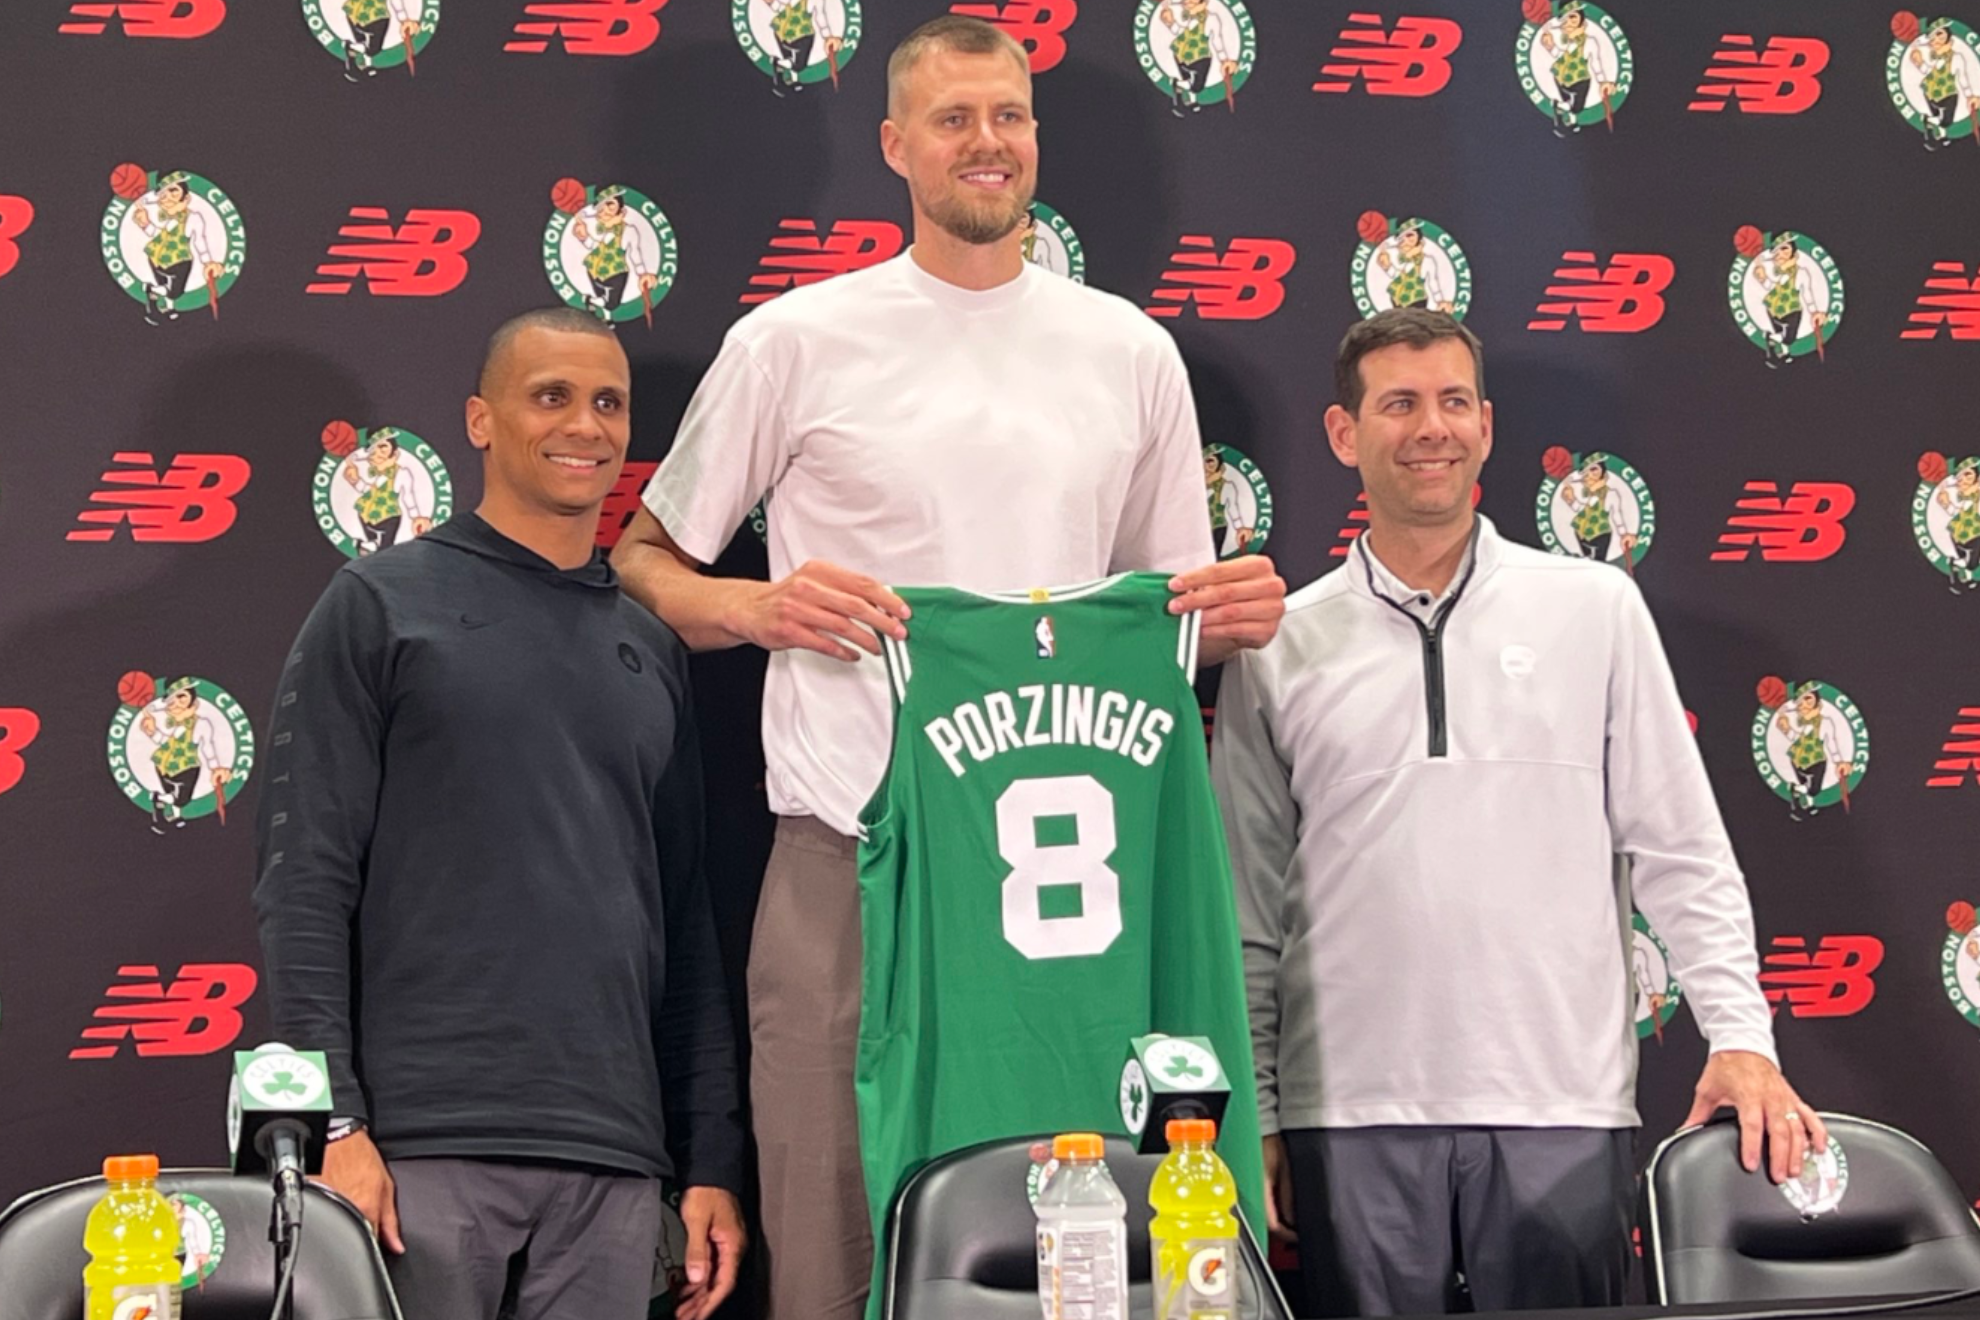 Porzingis was introduced at a press conference Thursday.